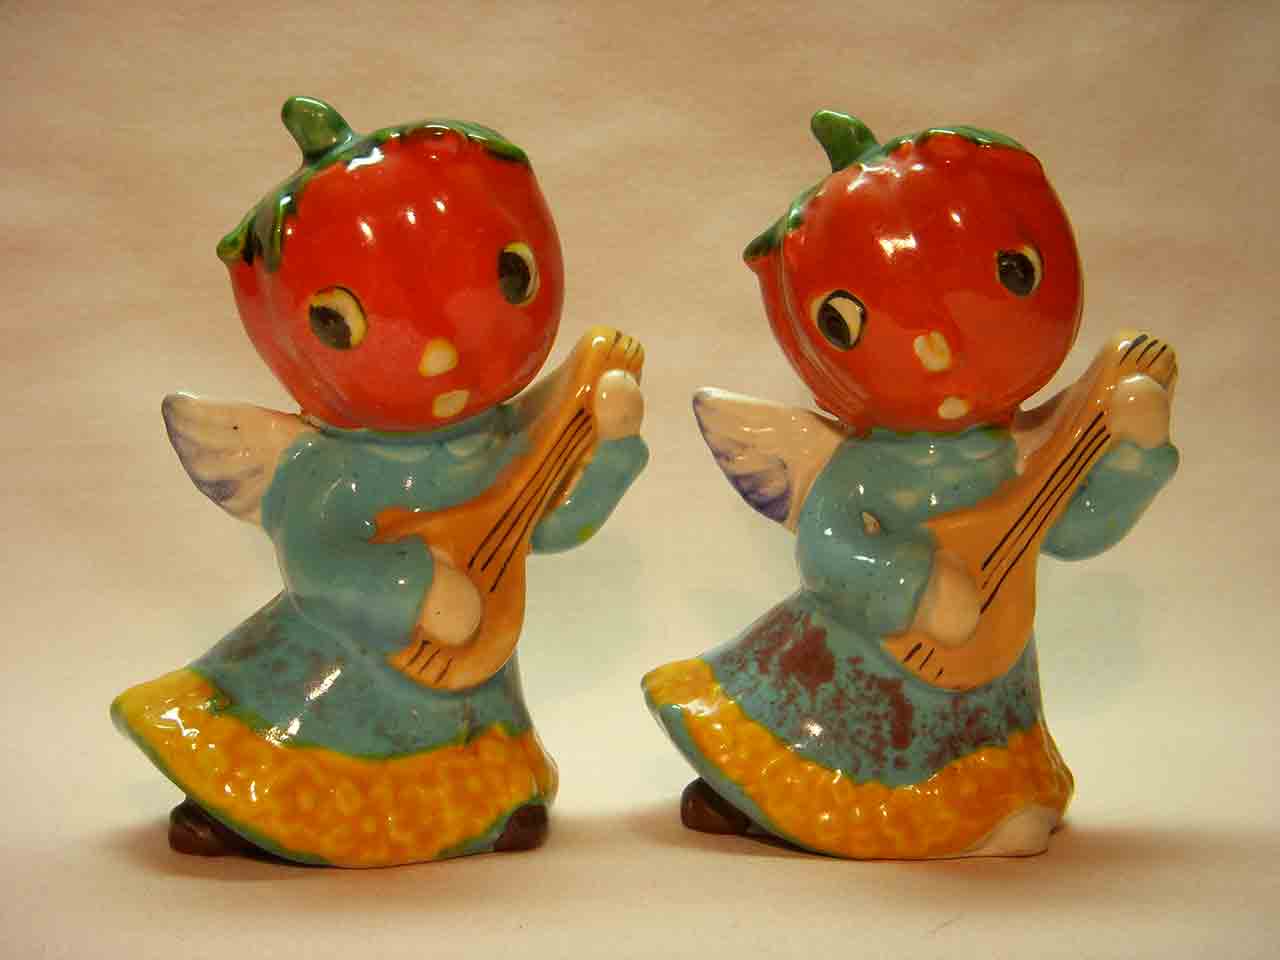 Anthropomorphic tomatoes playing mandolin - Heavenly Music series - salt and pepper shakers